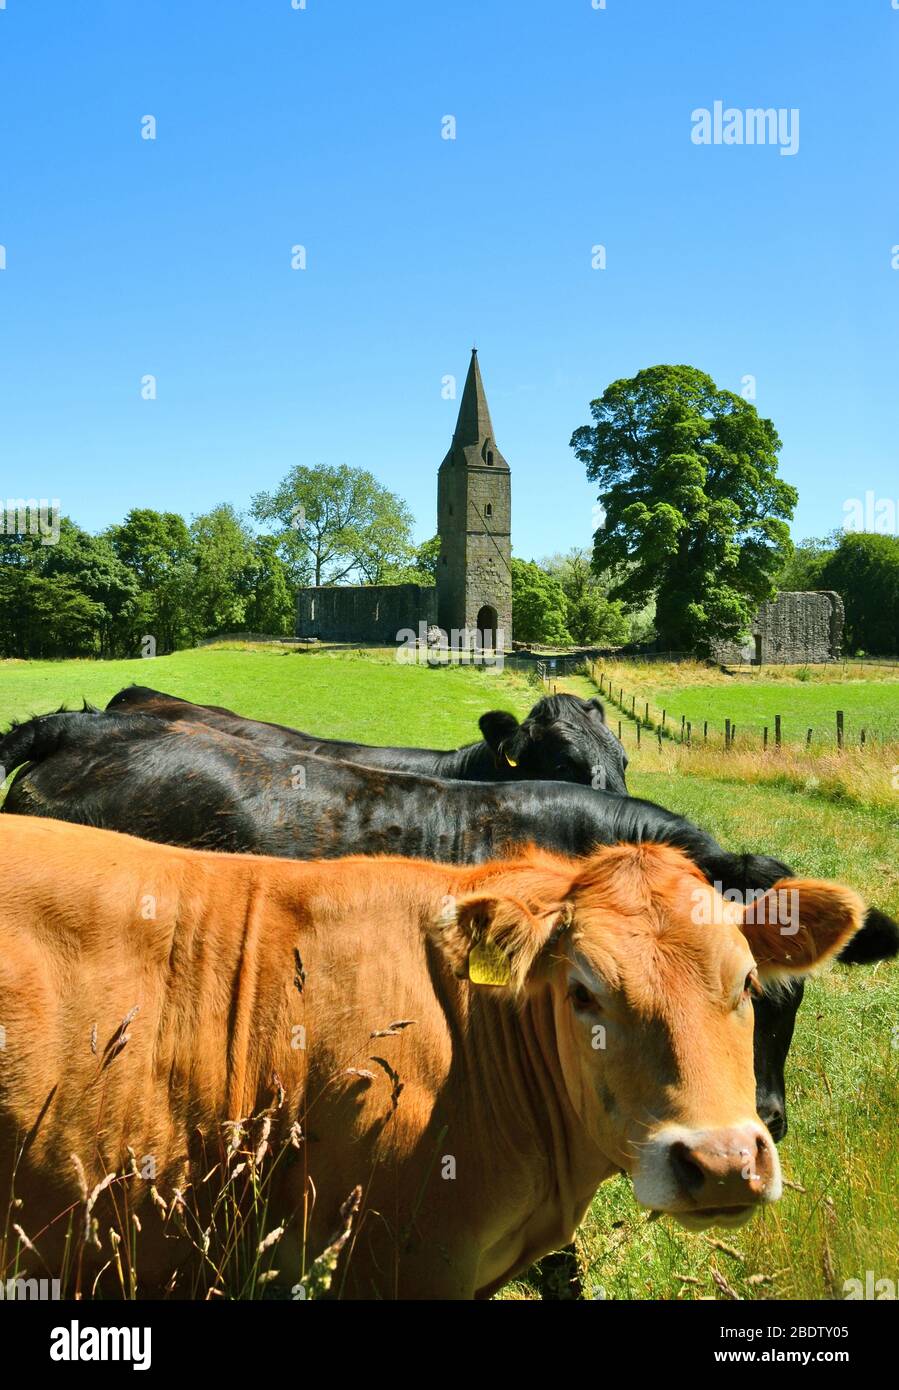 Ruins of Augustiaian Restenneth Priory 12th century near the town of forfar in Angus with cattle in the foreground. Stock Photo